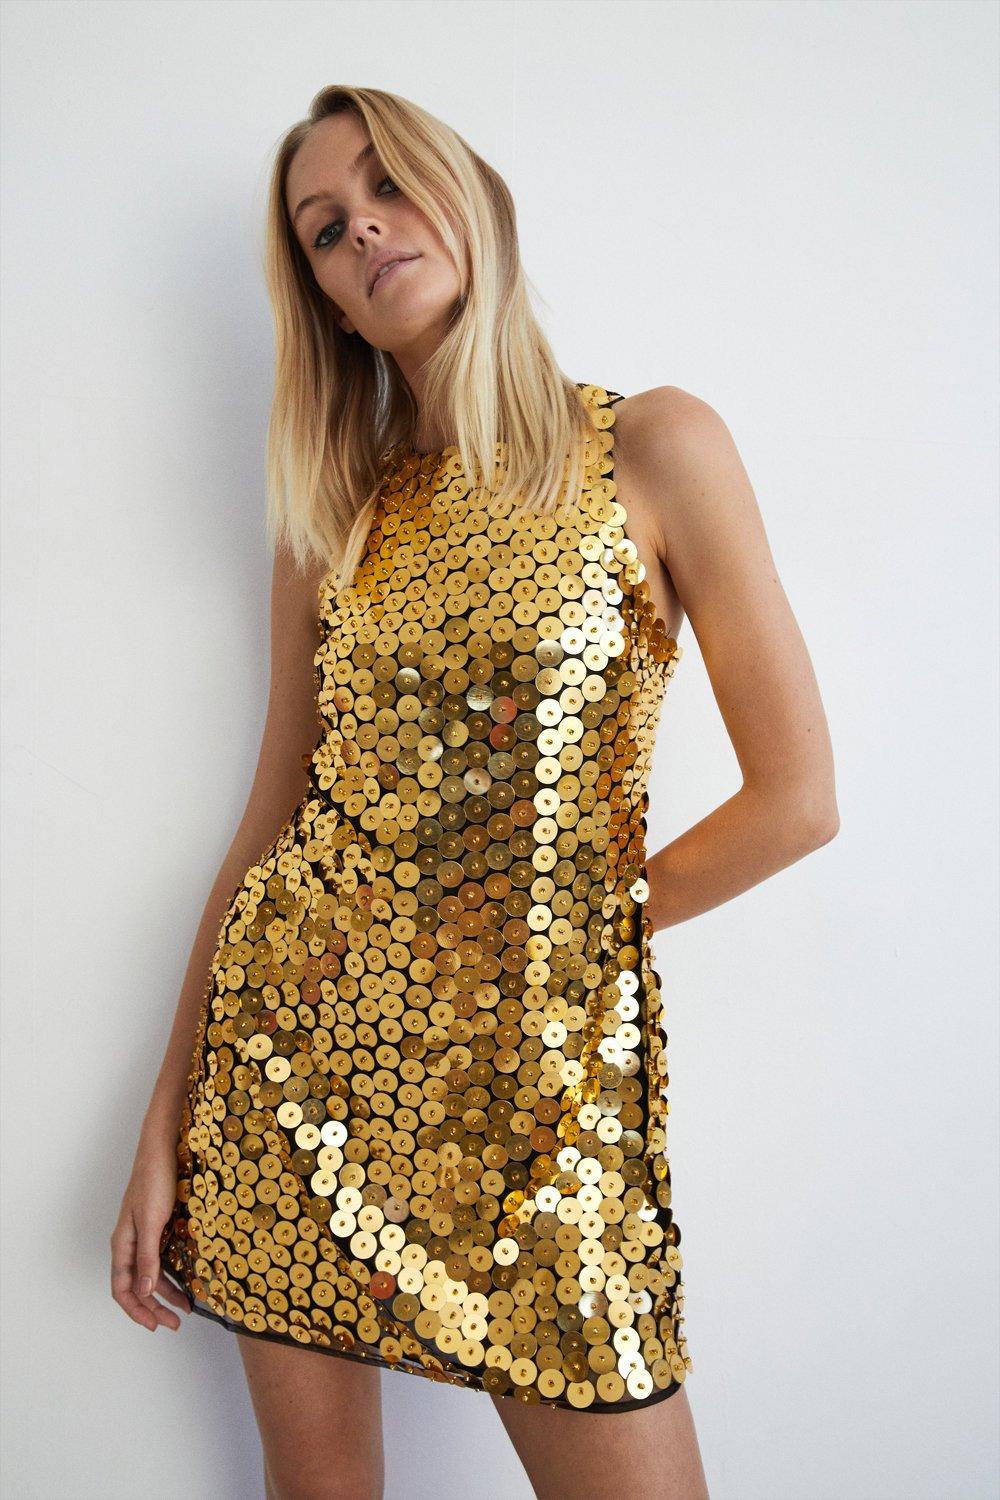 Disc Chainmail Sequin Halter Mini Dress